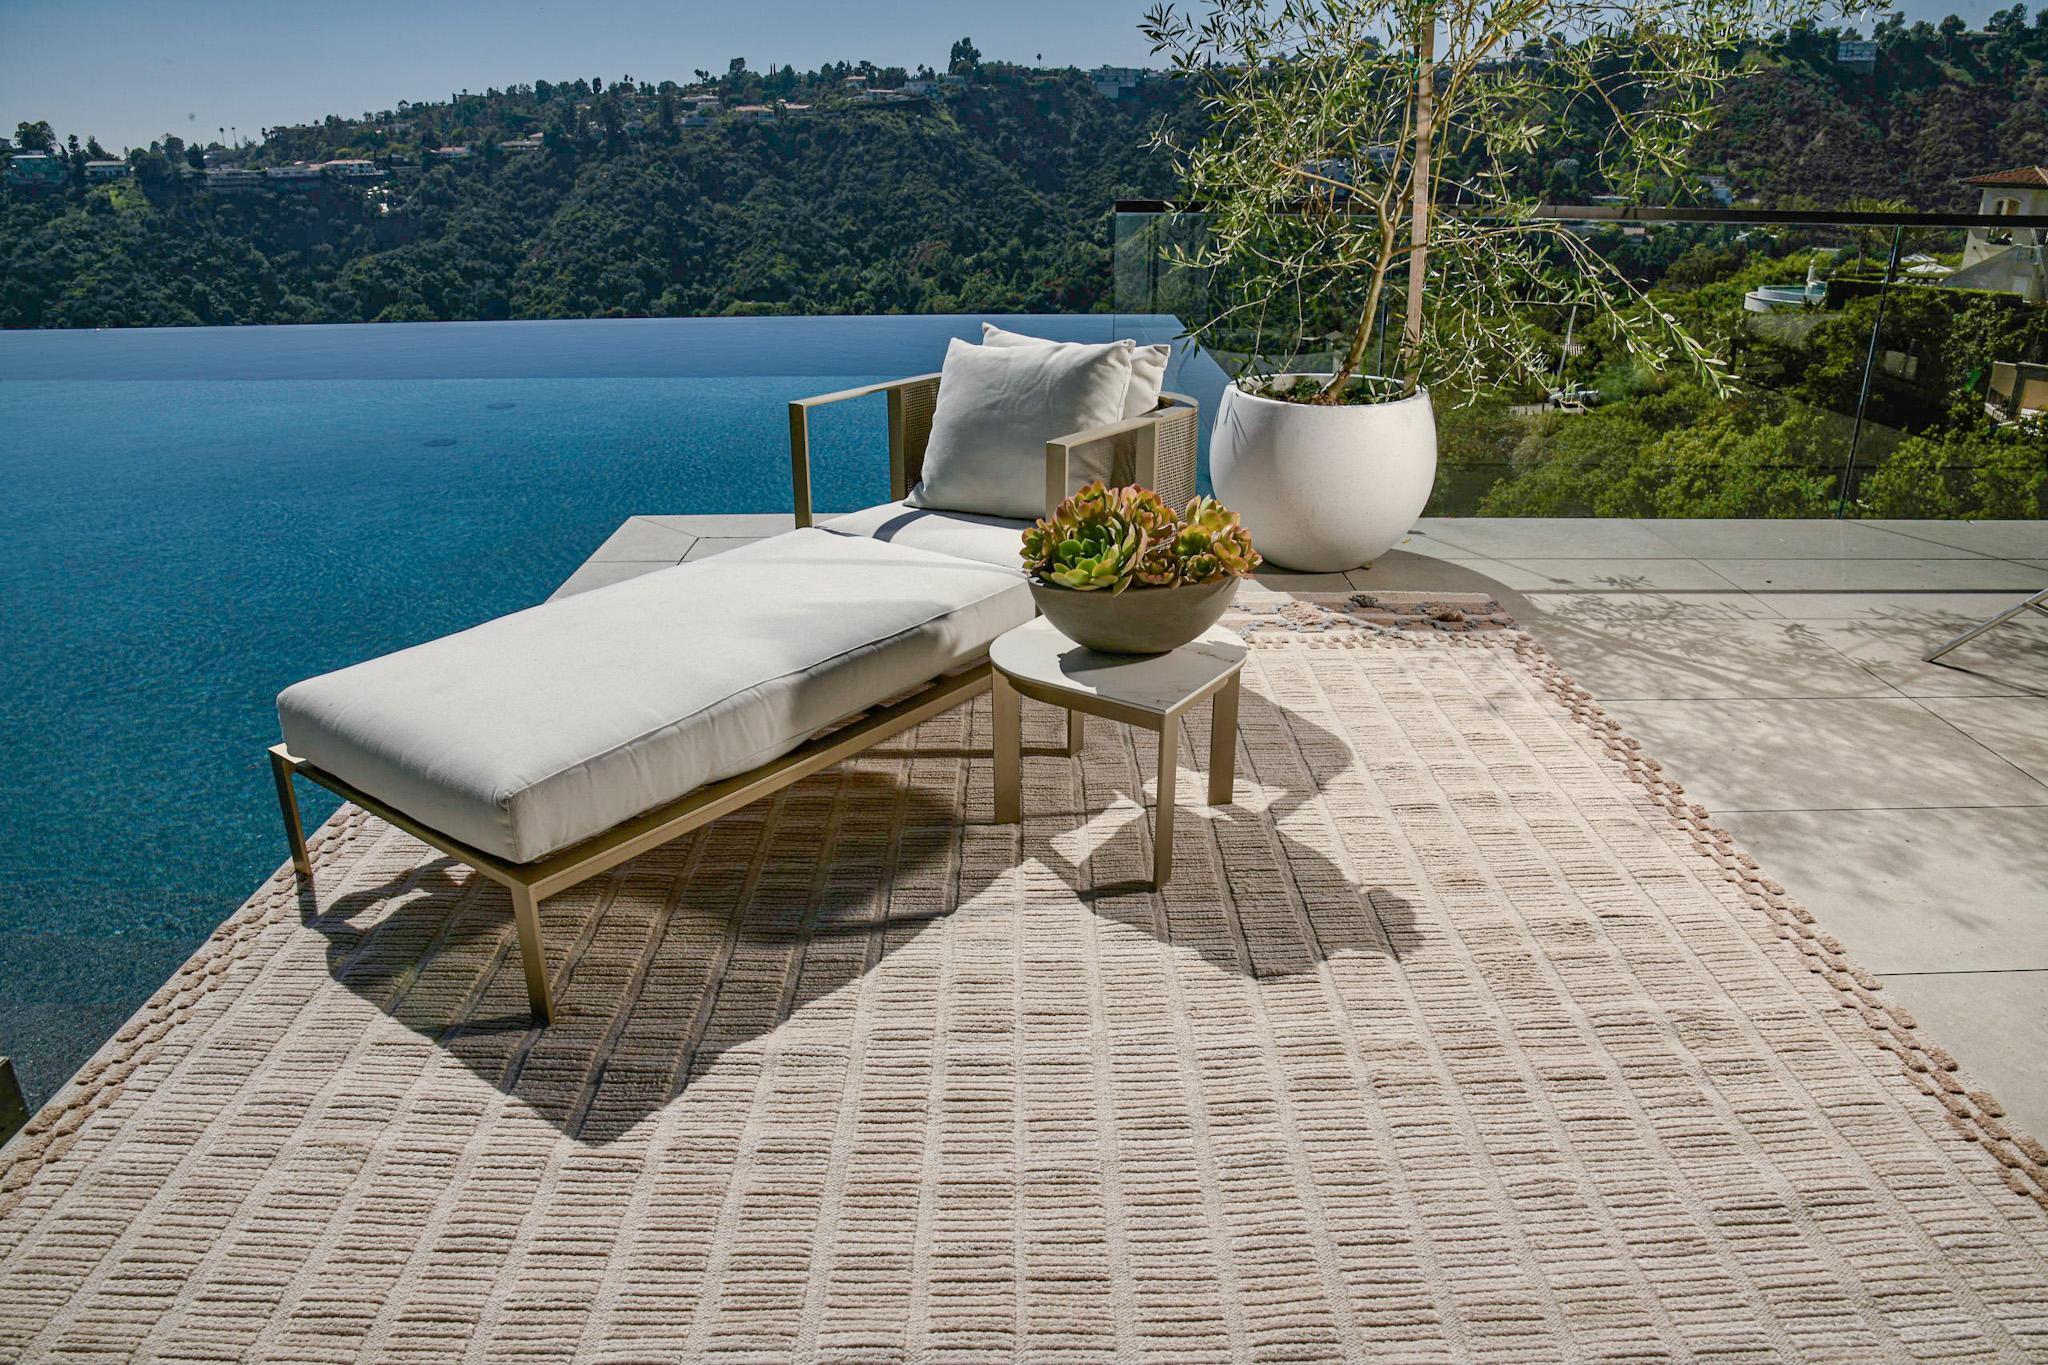 Enjoy the fresh air with Nasim, rugs that work indoors and out.

Rug Number
31428
Size
9' 0